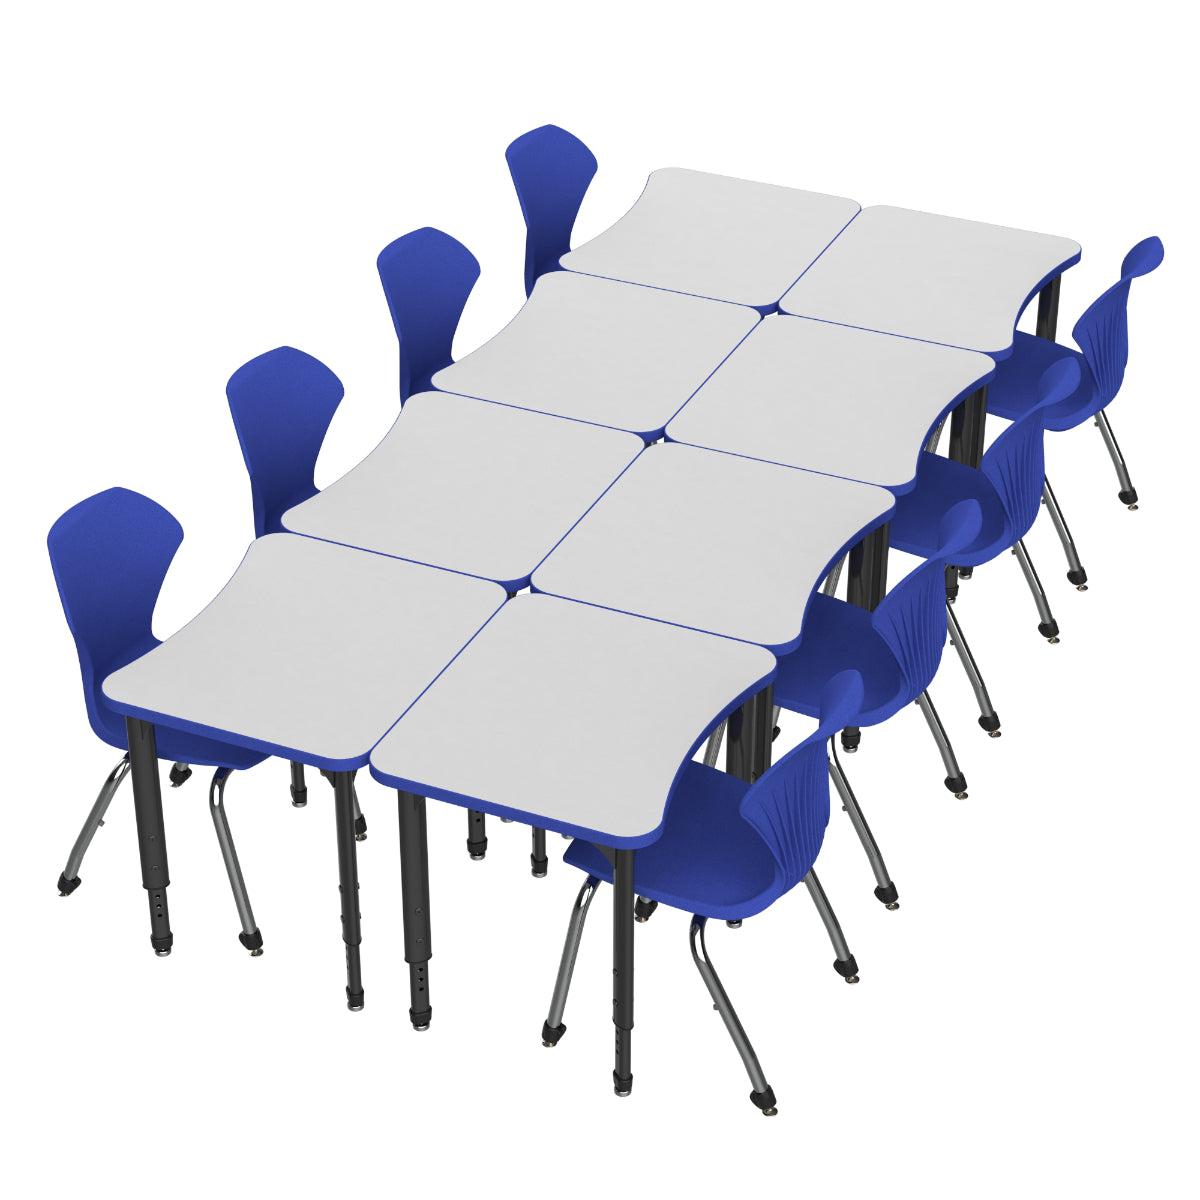 Apex Dry Erase Classroom Desk and Chair Package, 8 Curved Collaborative Student Desks with 8 Apex Stack Chairs